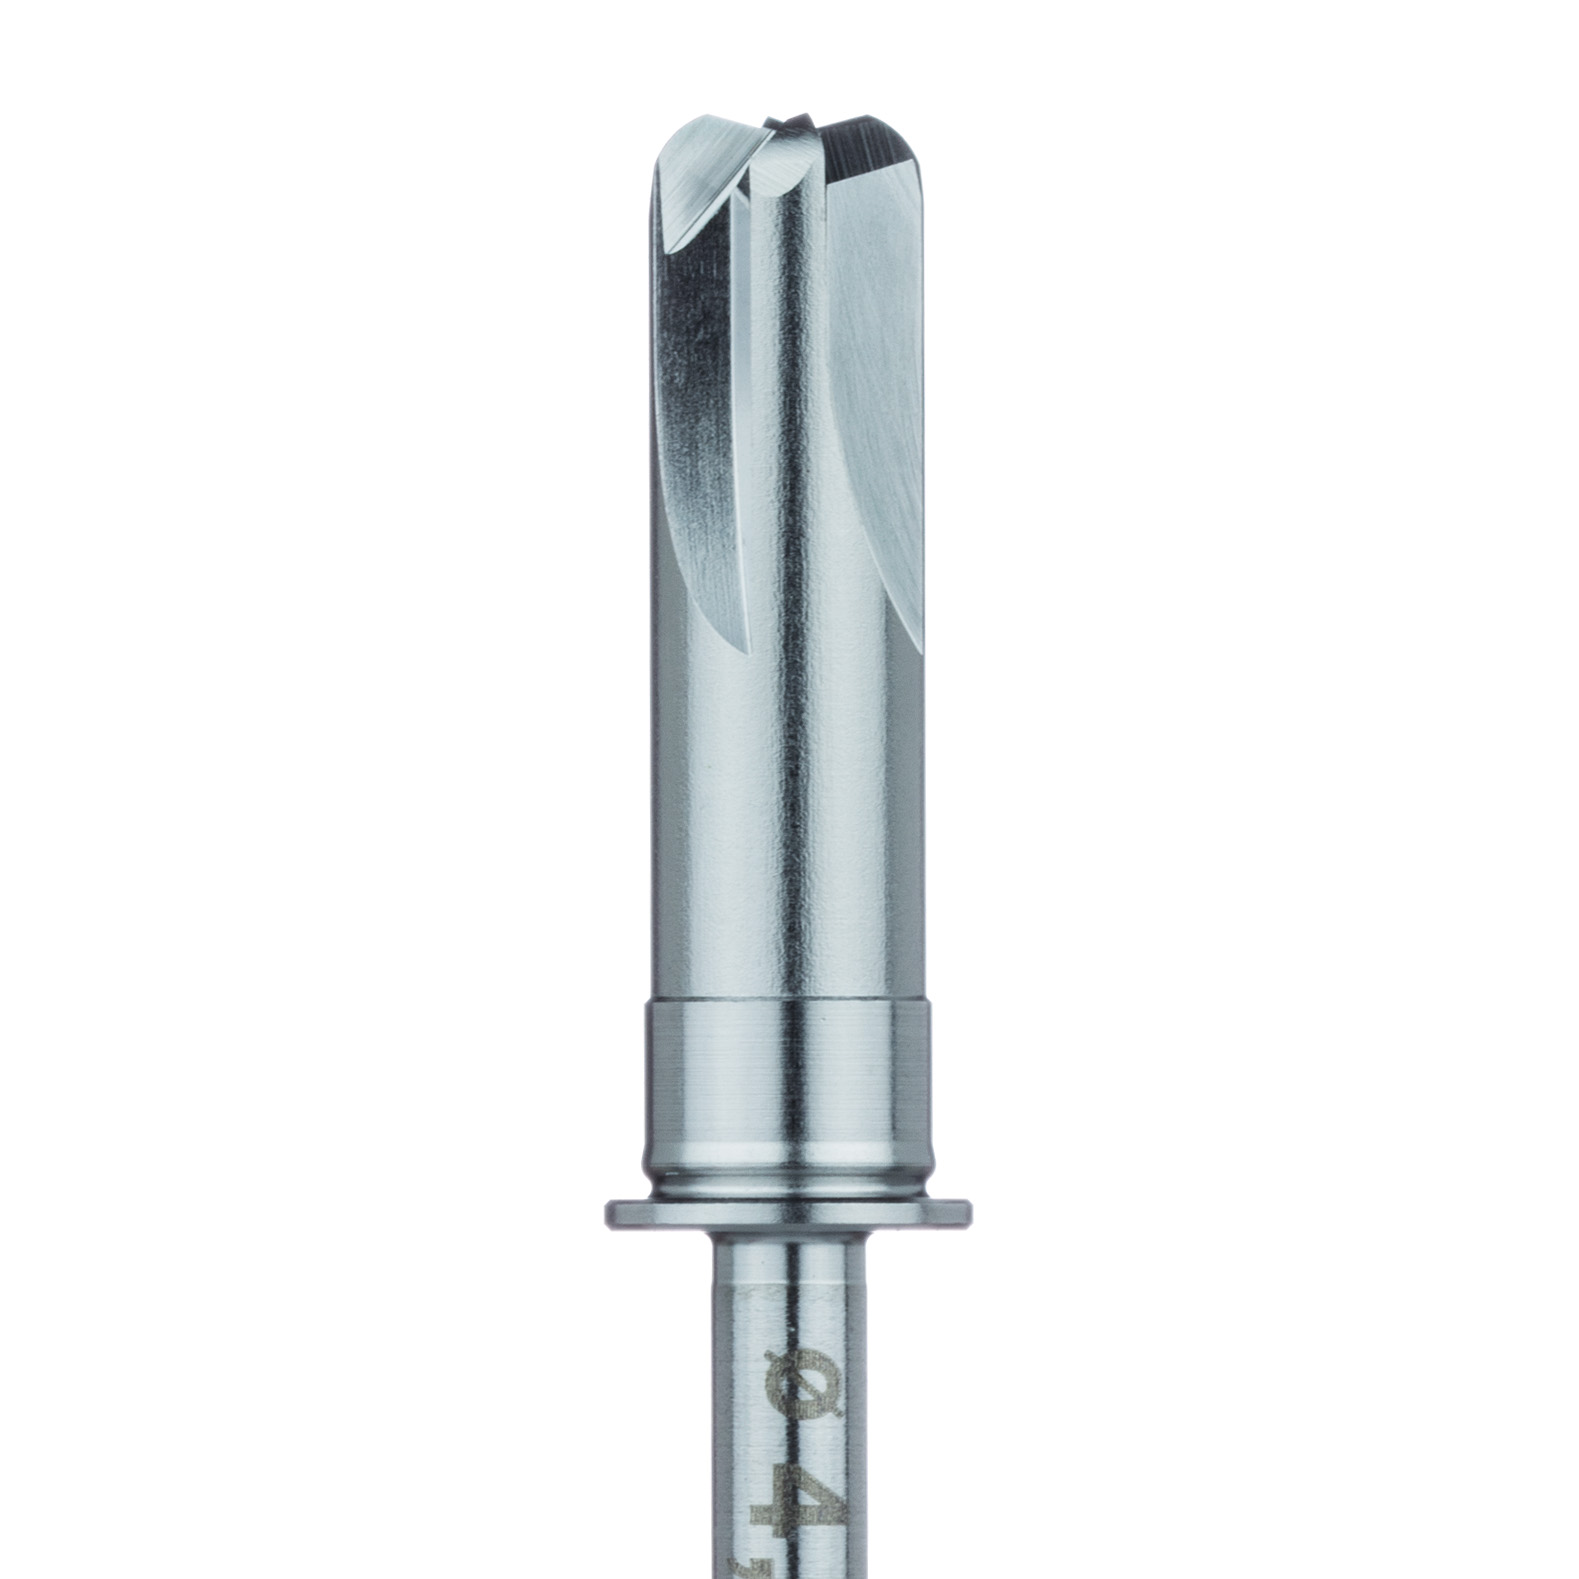 CL007 Surgery, Crestal Drill with stop, 4.1mm RAXL